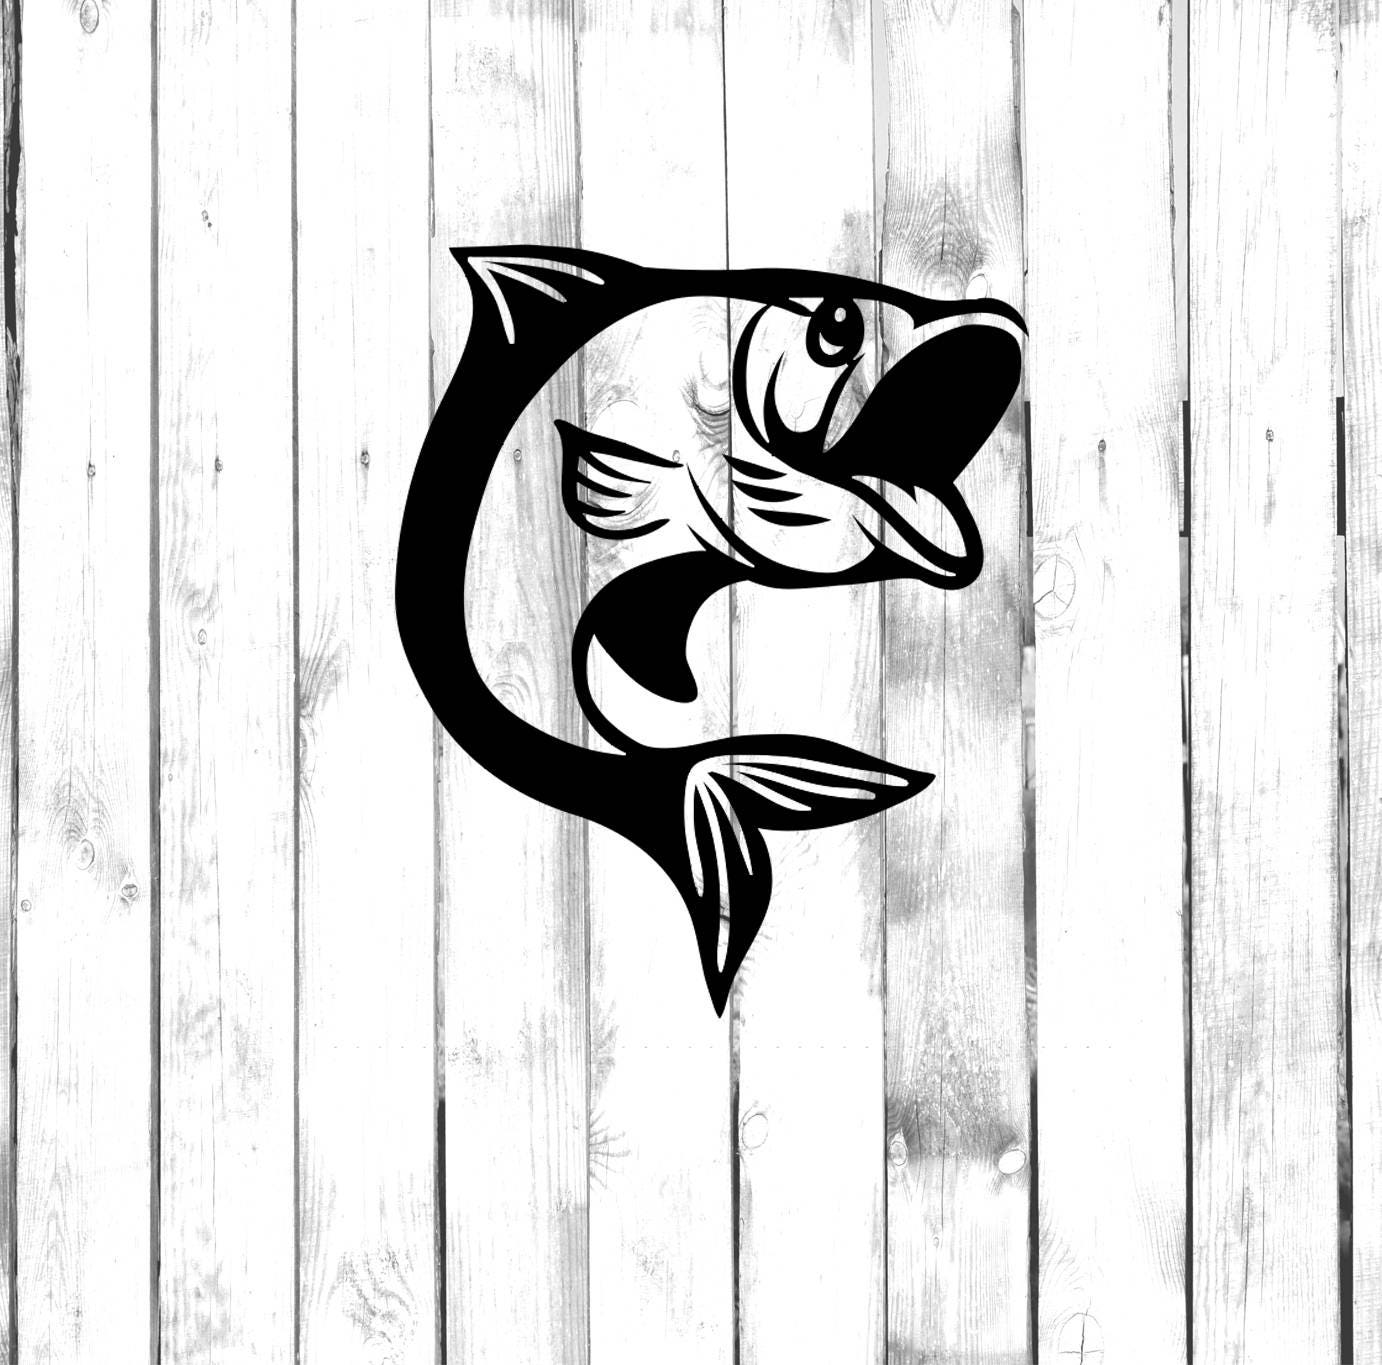 Trout Fish Jumping Out of Water Di Cut Decal Car/truck/home/laptop